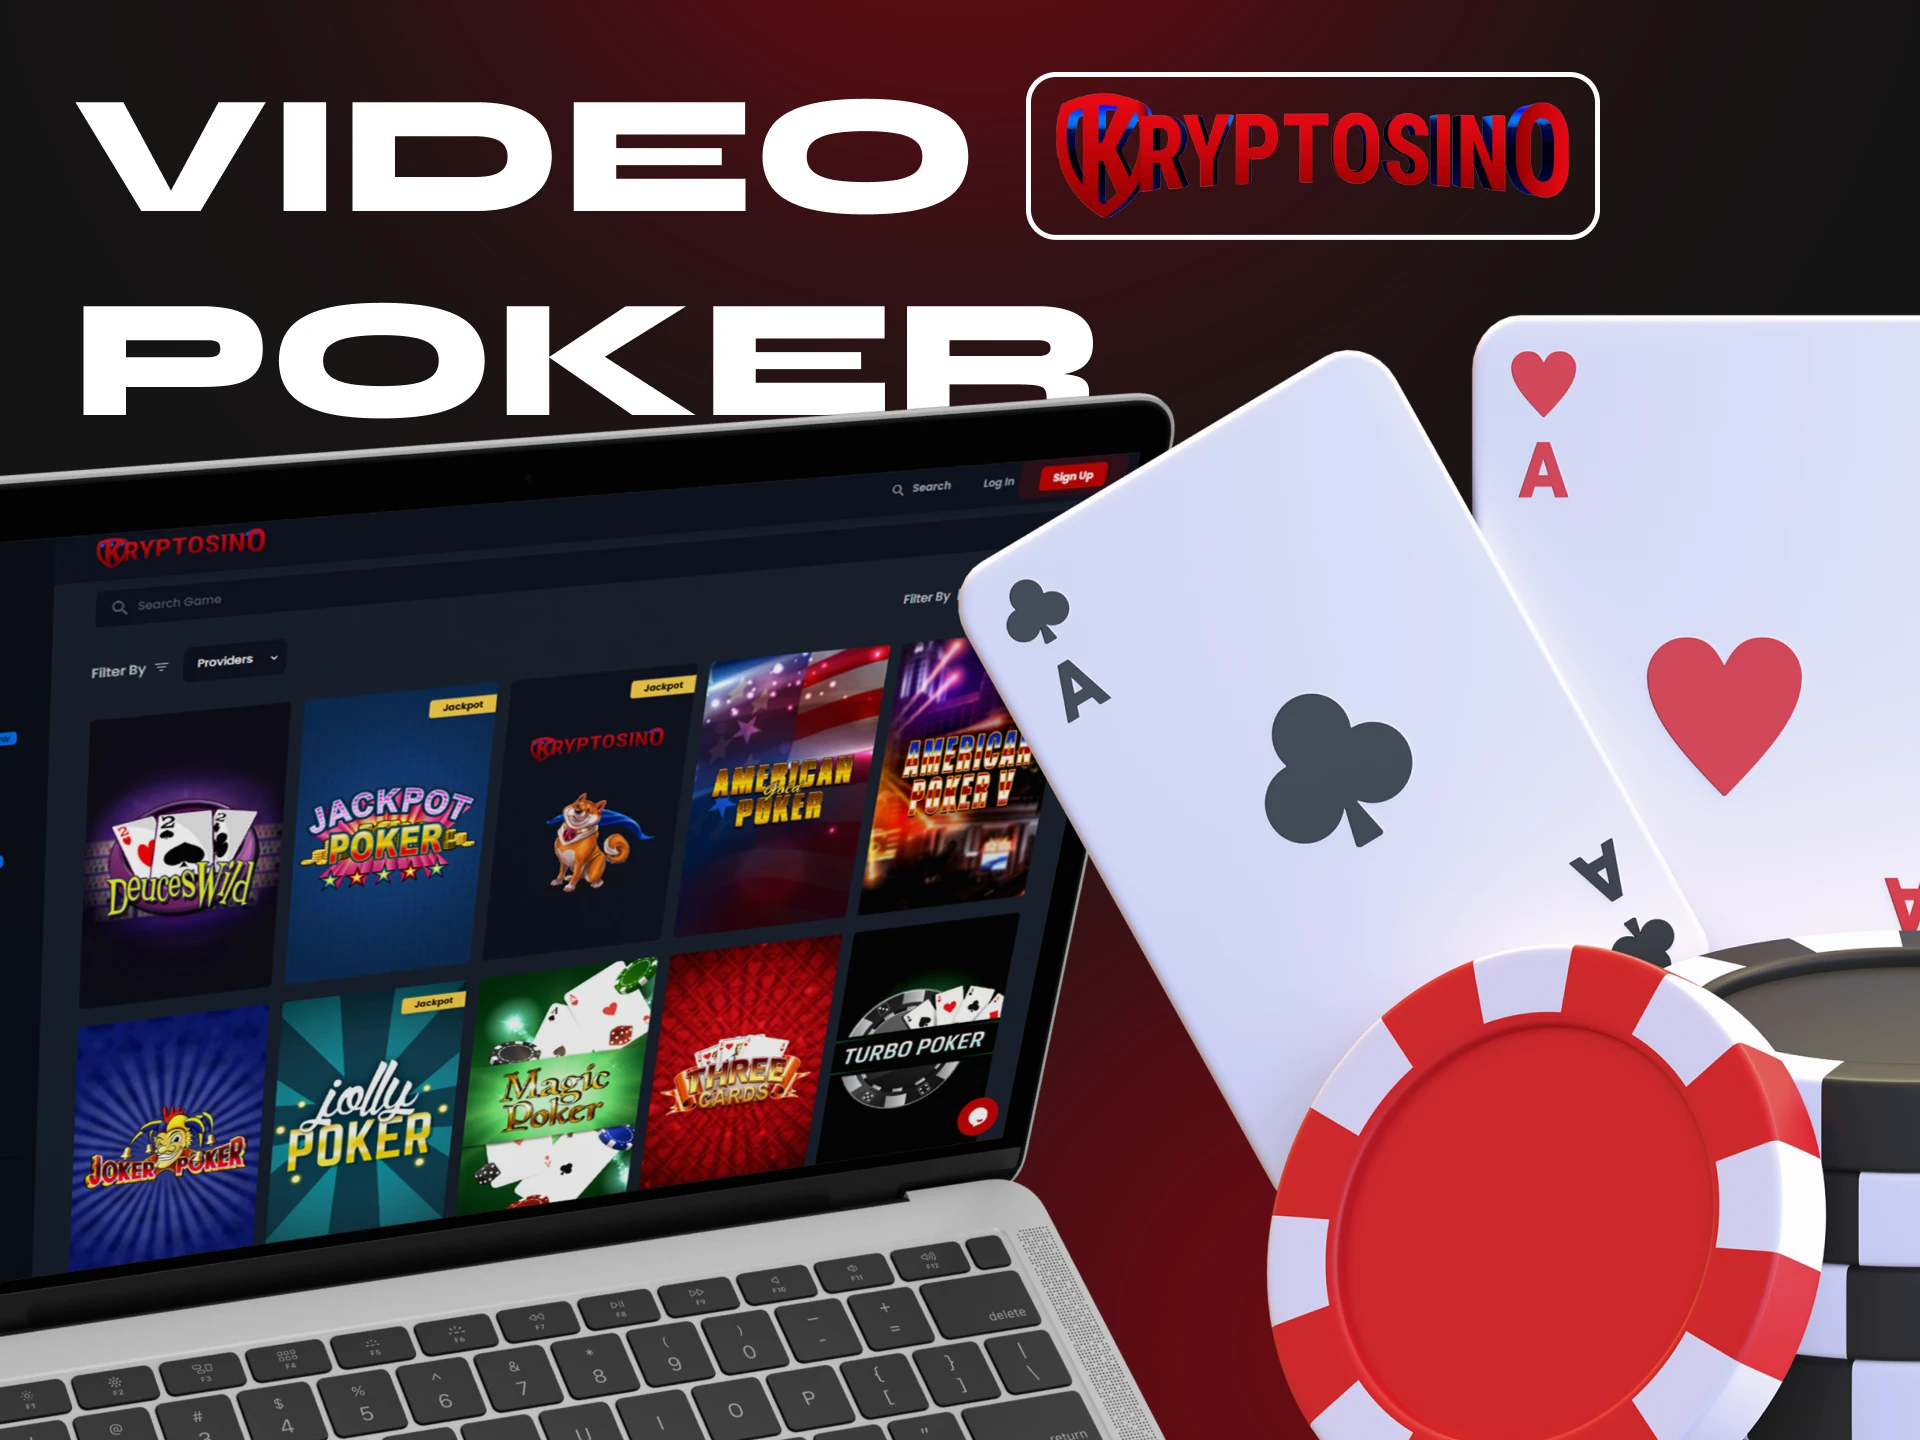 Video poker is one of the most popular games at Kryptosino casino, try it out.